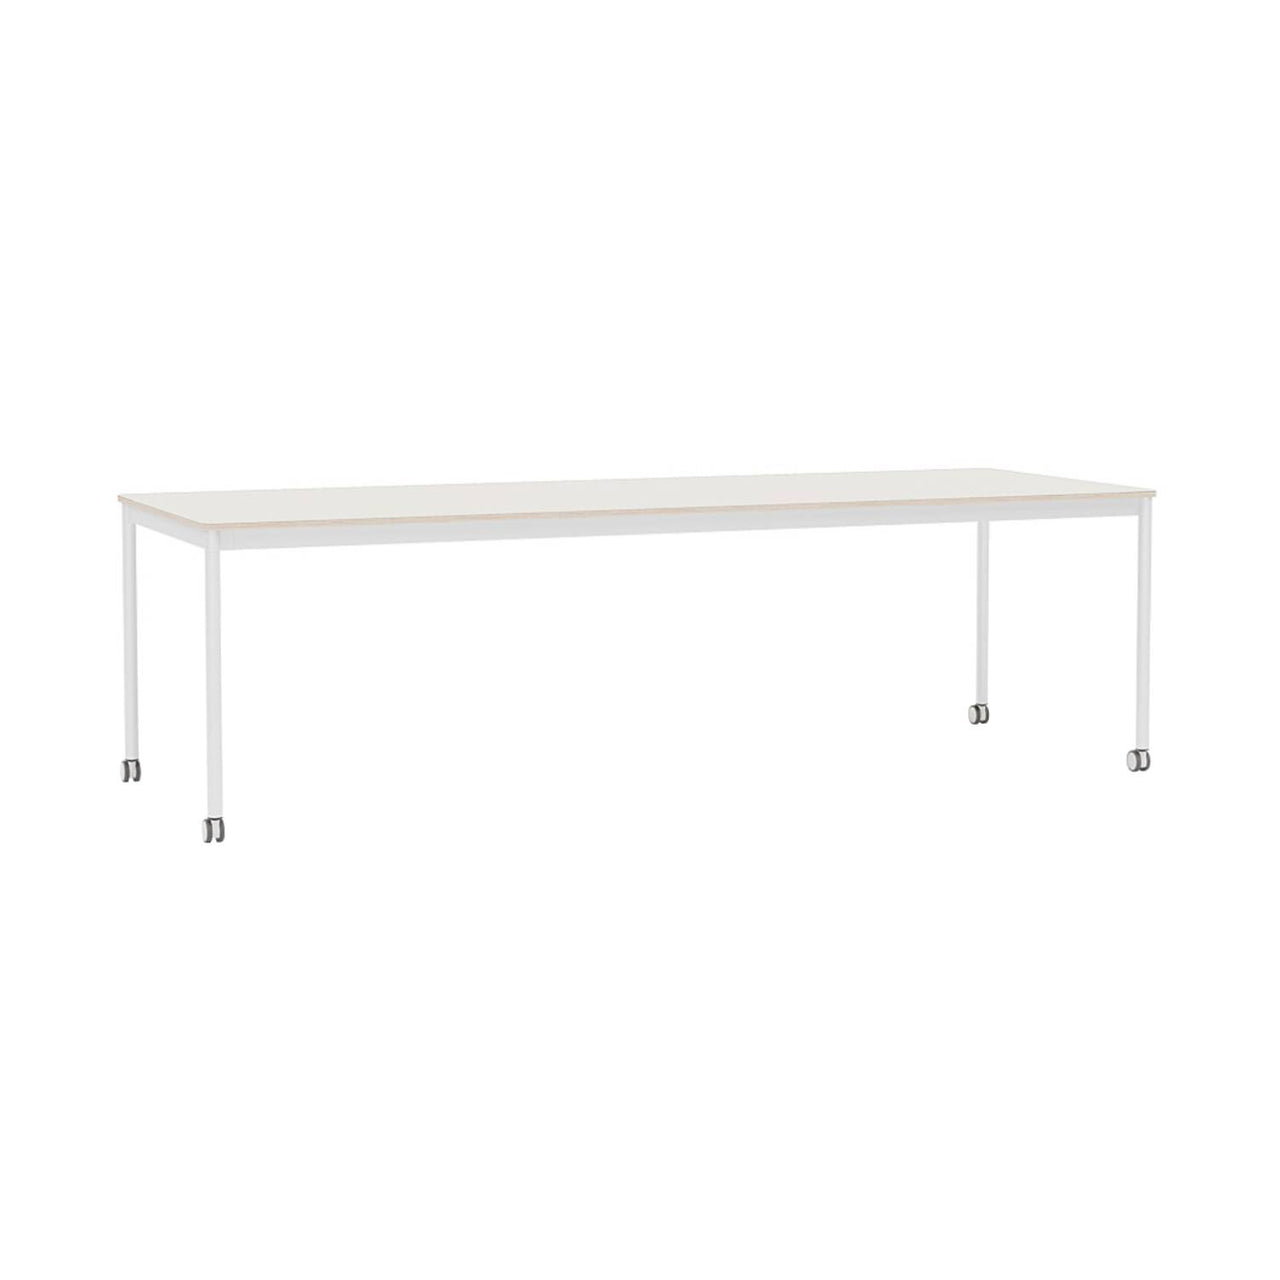 Base Table with Castors: Large + 98.4